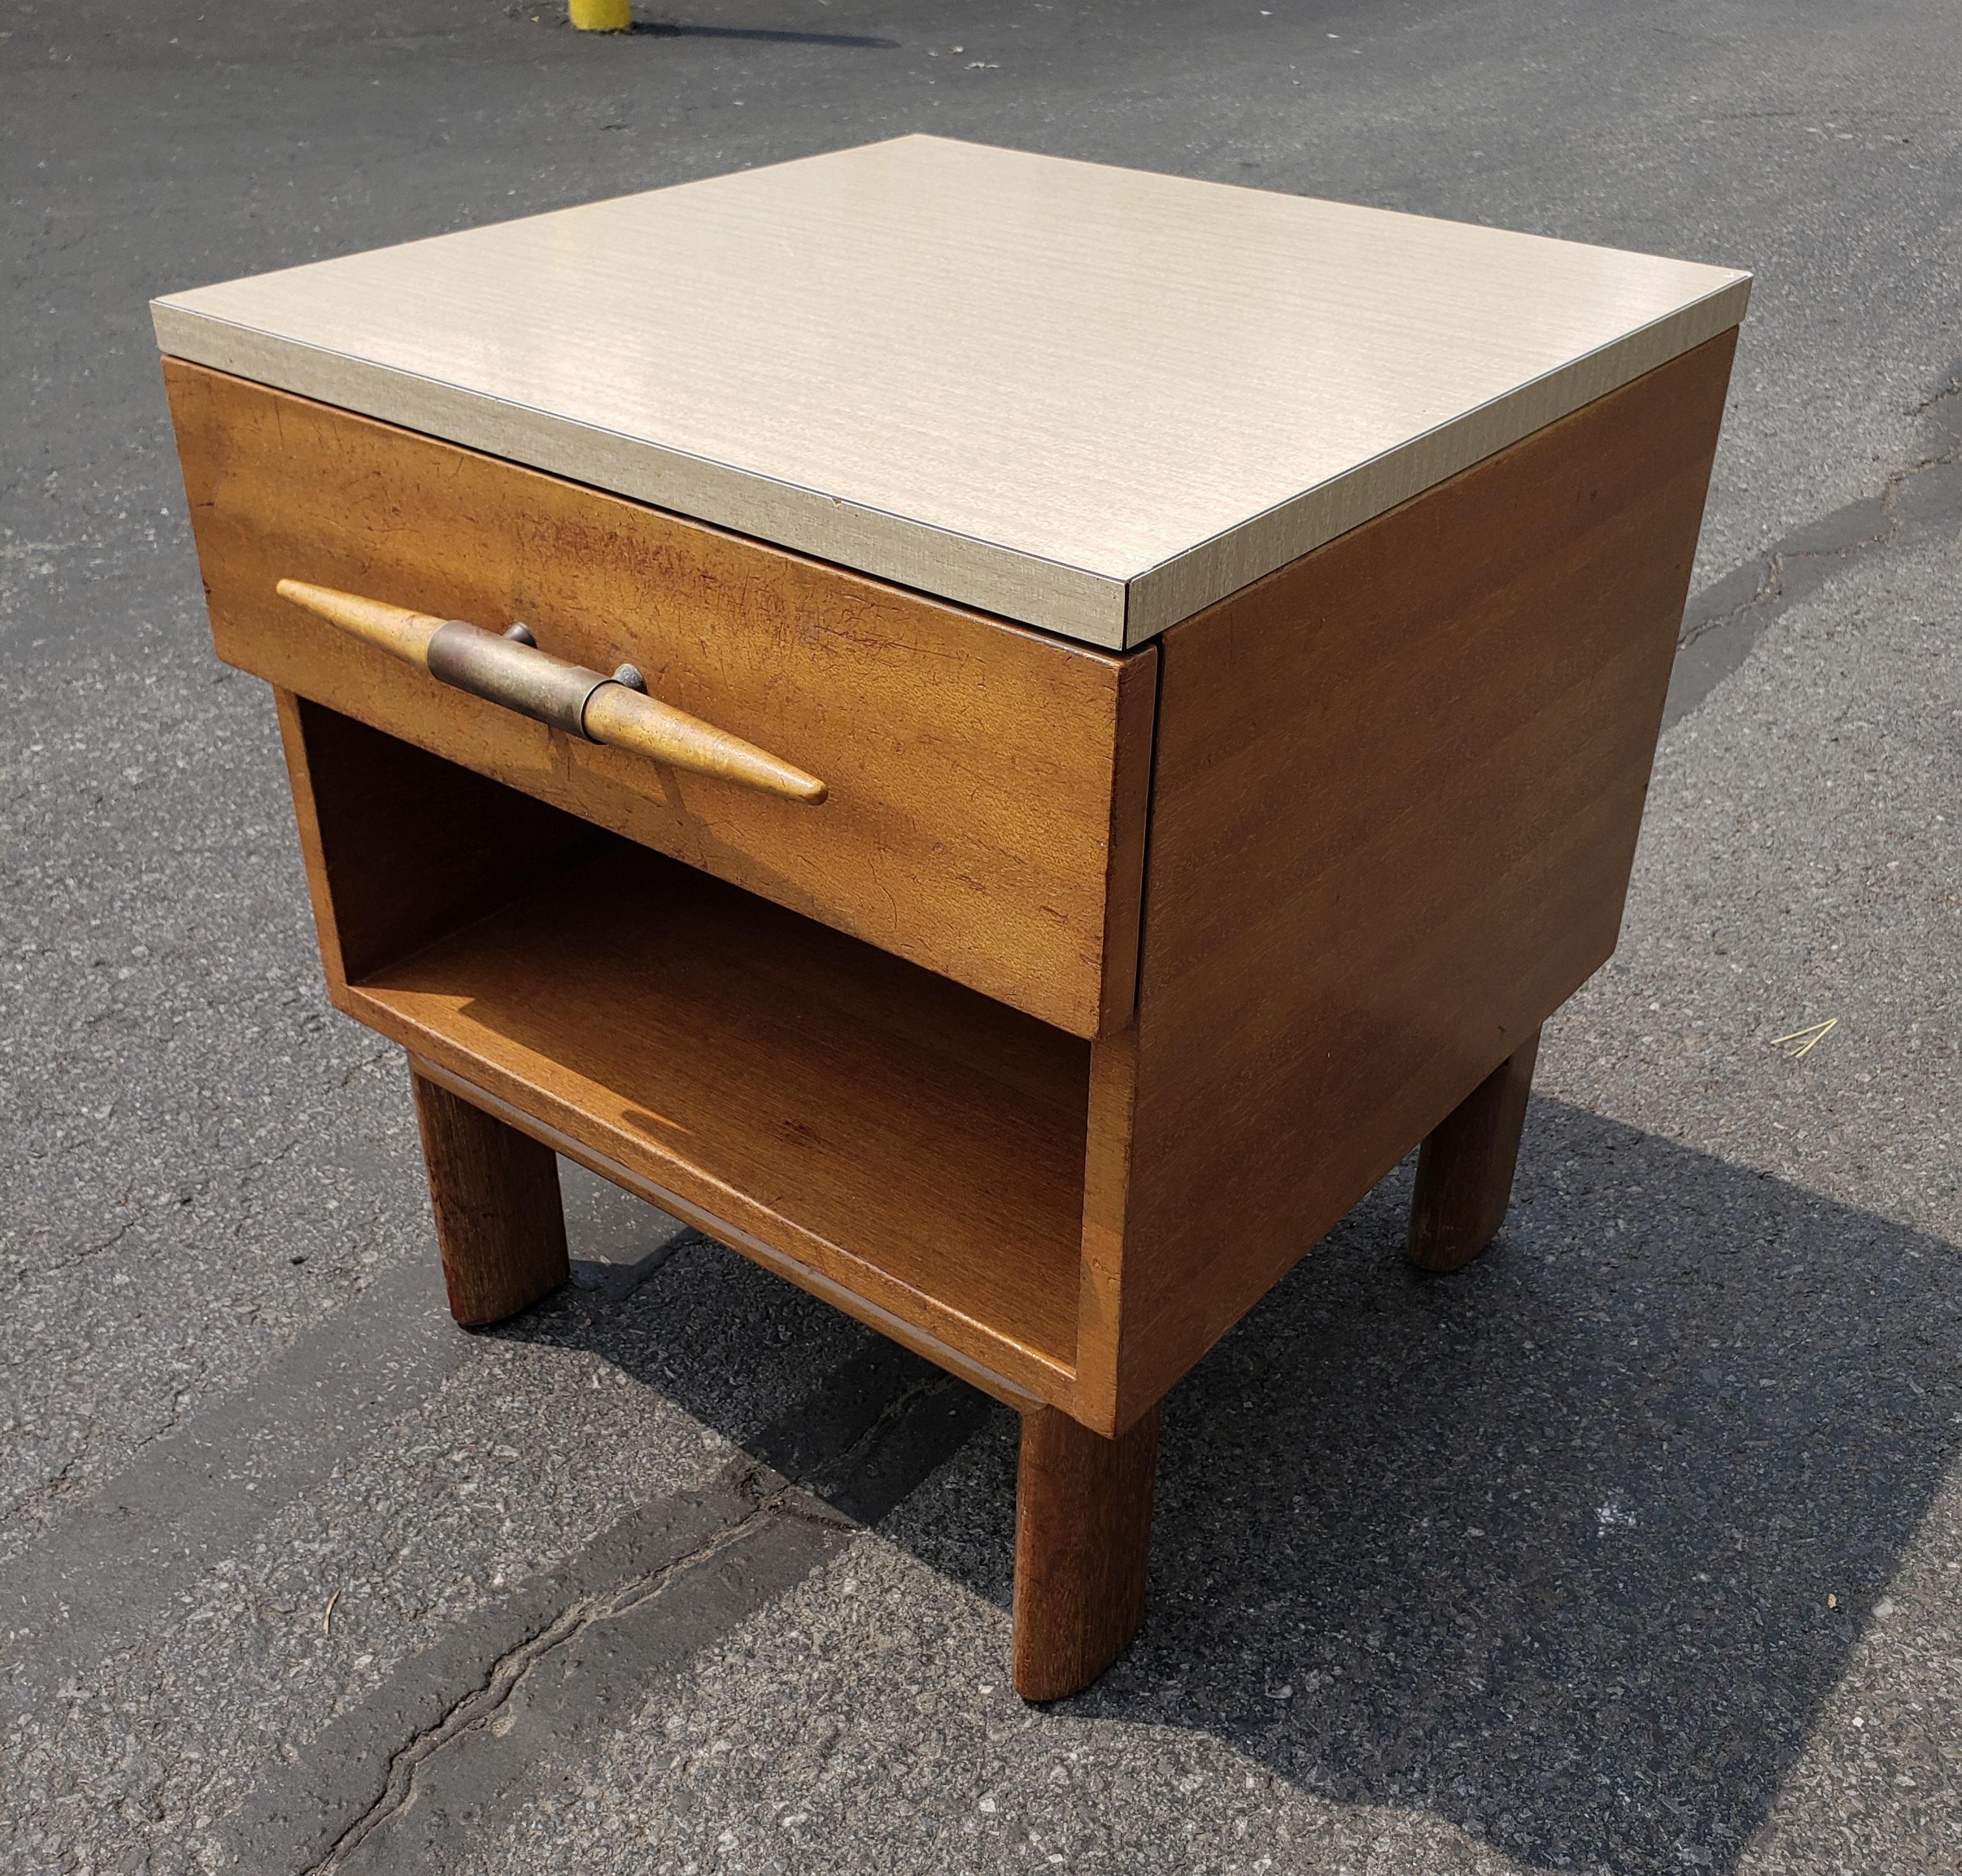 1950s John Keal for Brown Saltman Nightstands in Blonde Mahogany & Formica Top In Good Condition For Sale In Germantown, MD